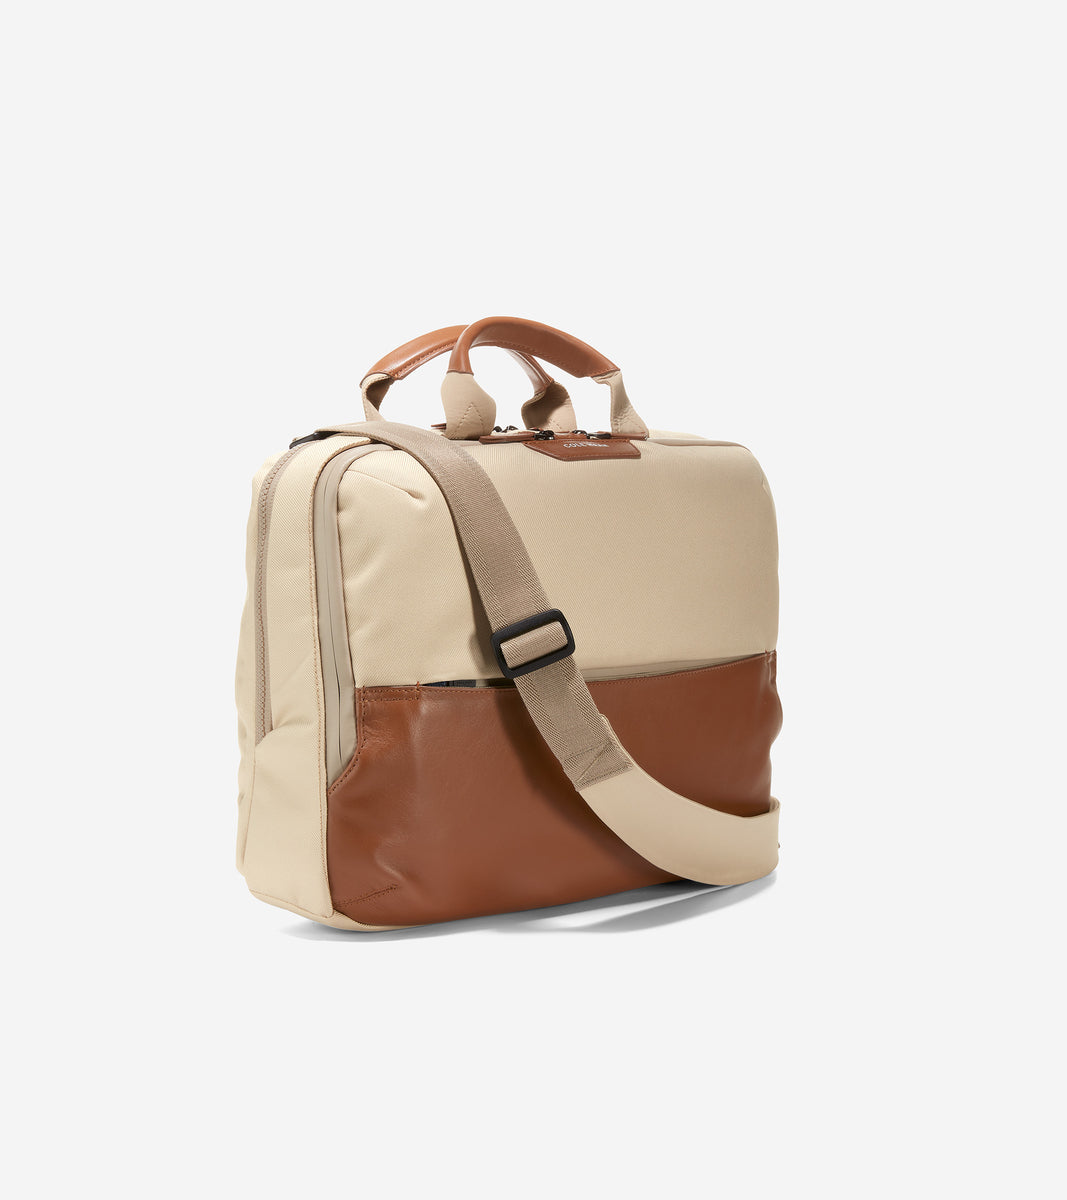 Go-To Work Bag